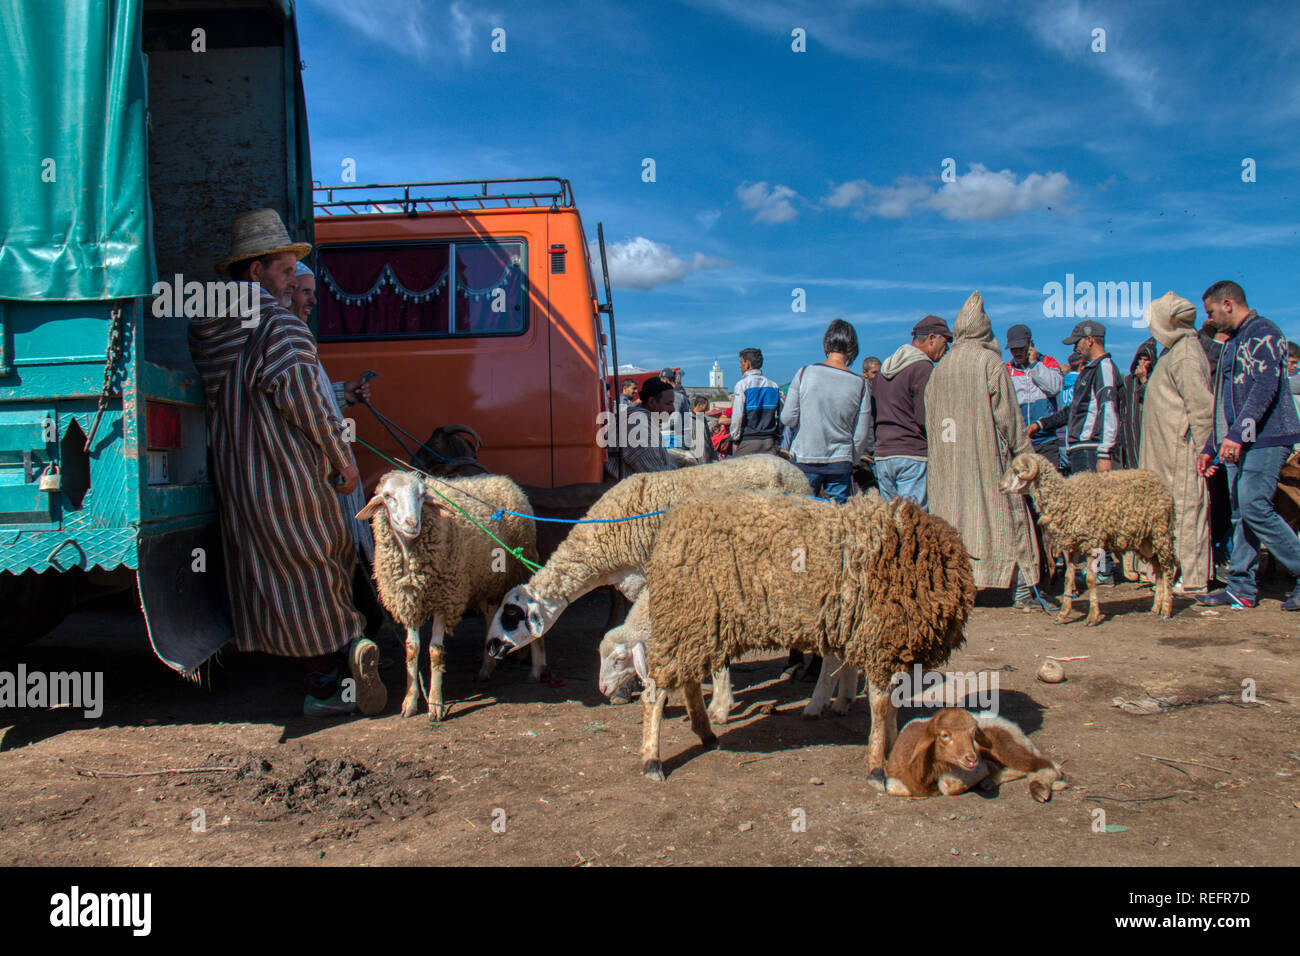 Oued Laou, Chefchaouen, Morocco - November 3, 2018: the sheep vendors in the traditional and picturesque open-air market are held every Saturday Stock Photo